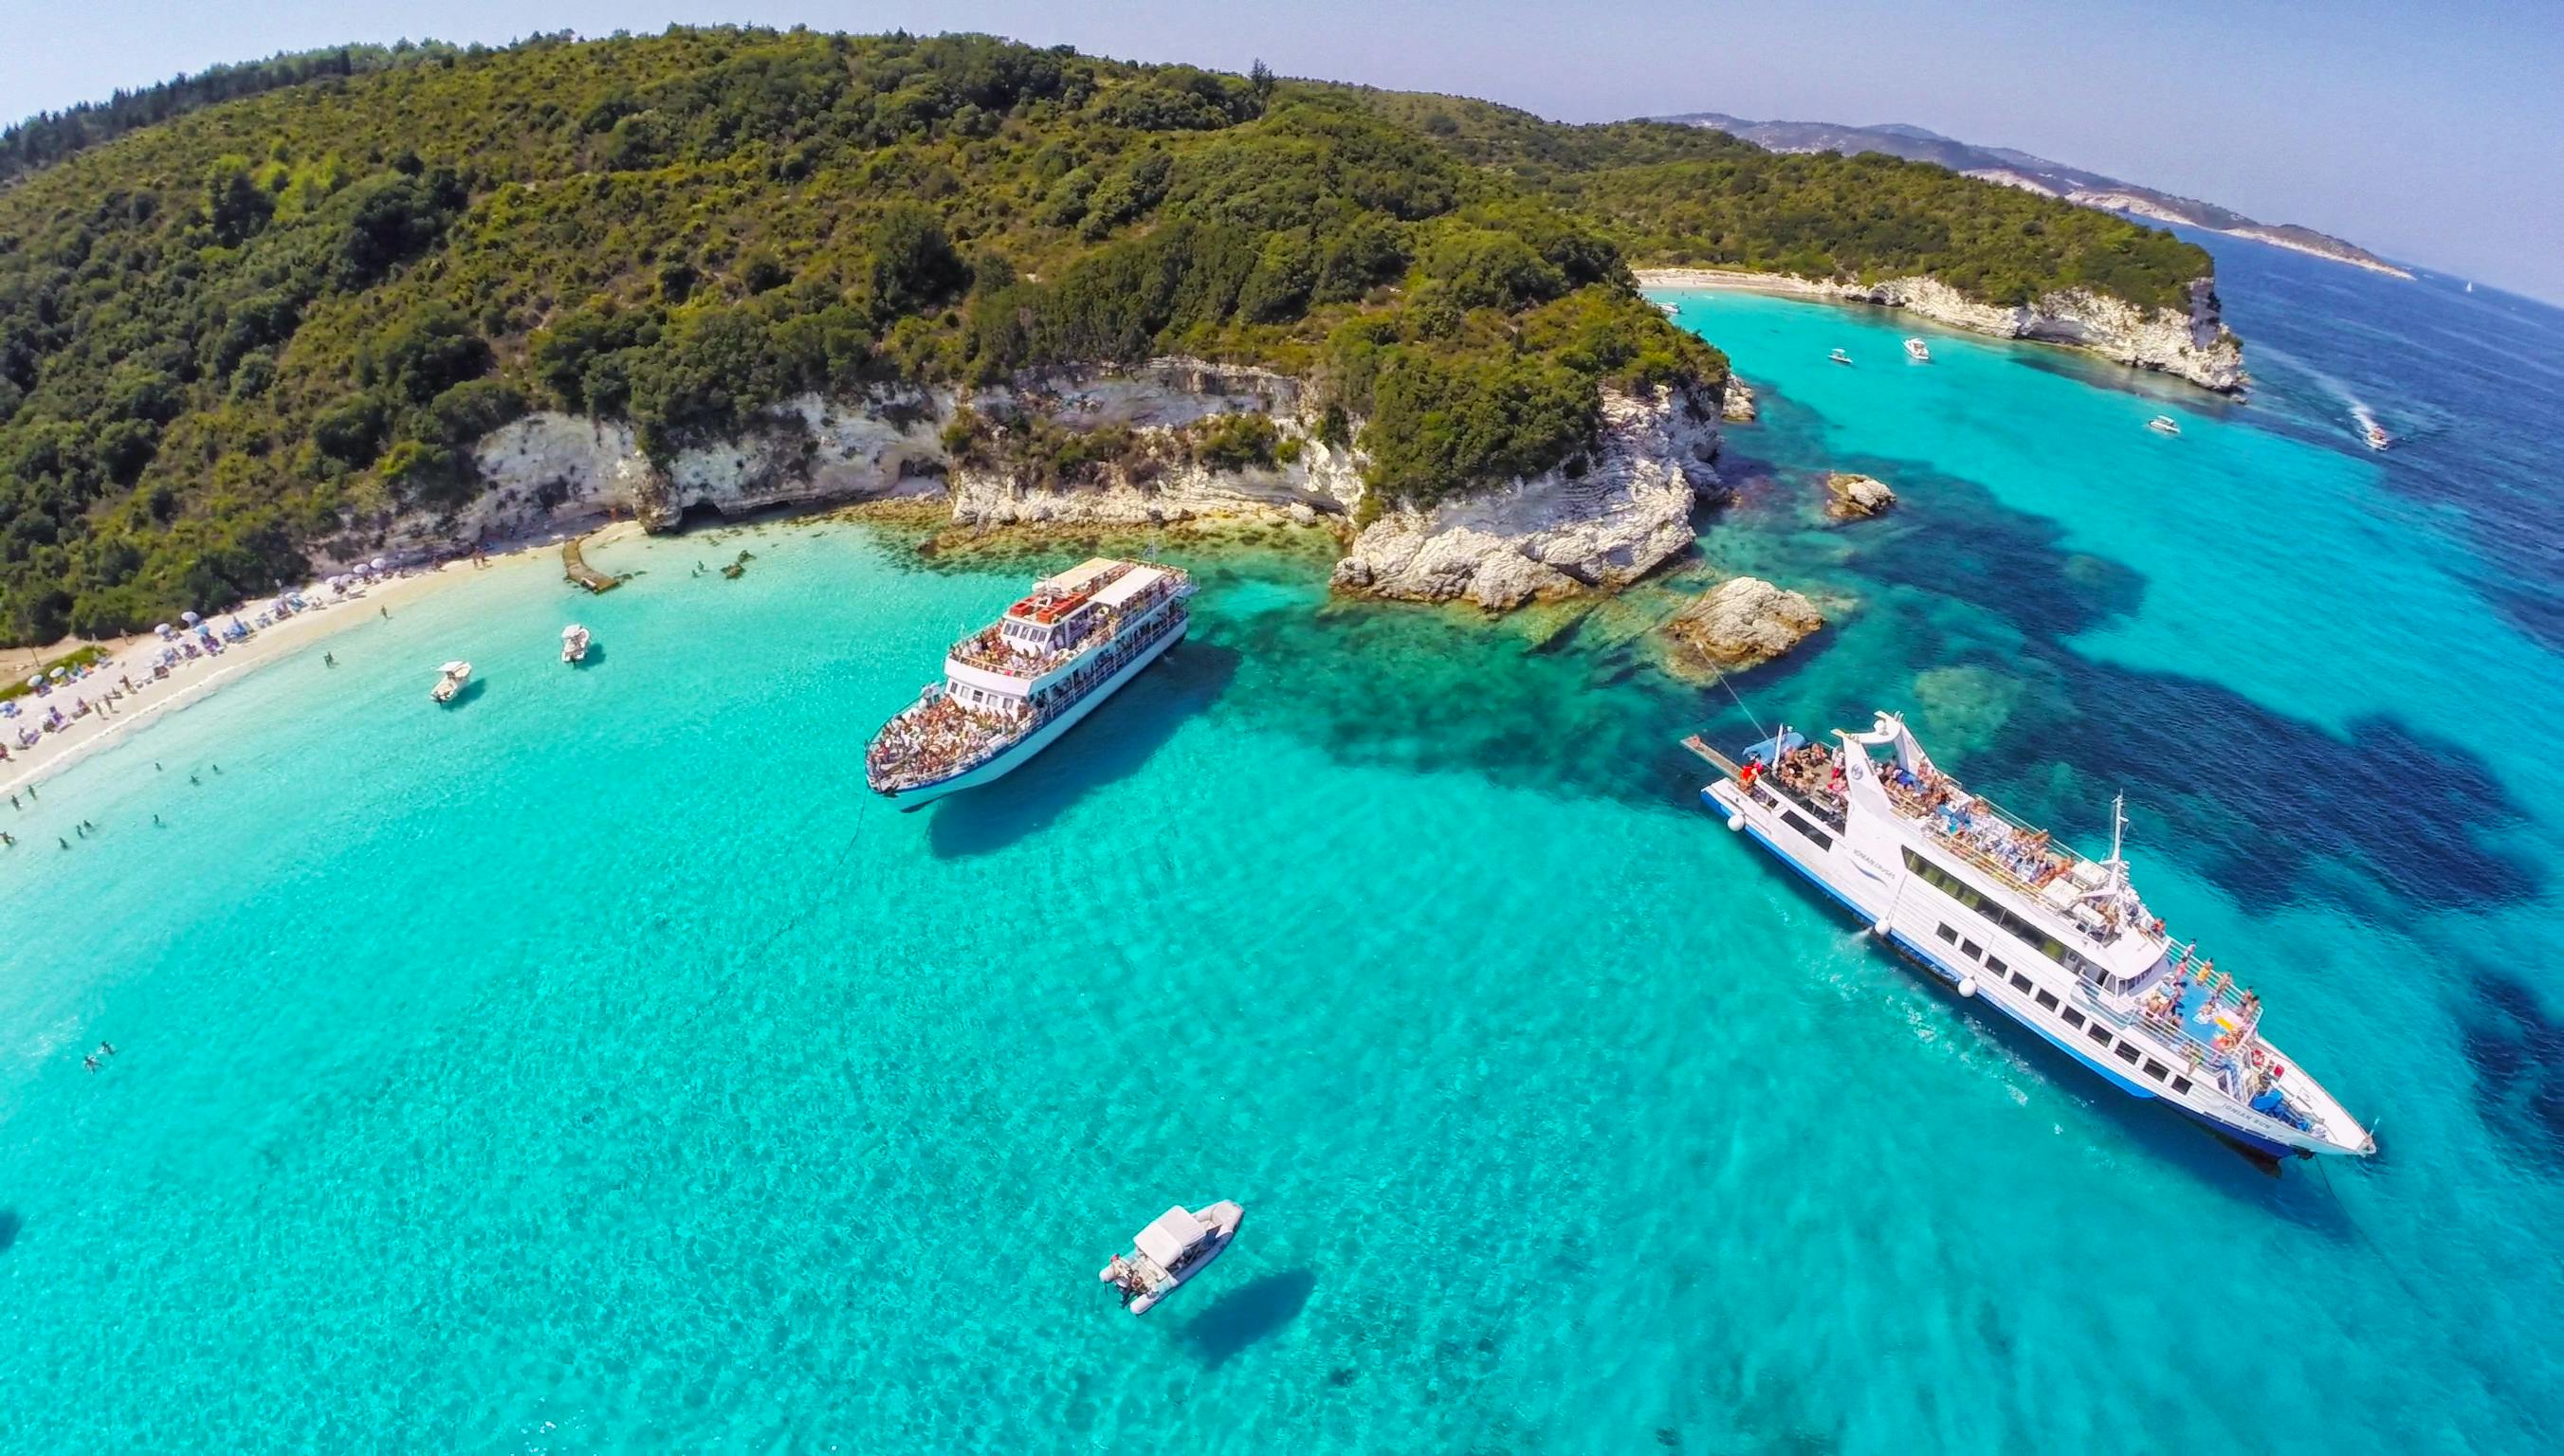 Paxos Antipaxos blue caves cruise from Corfu